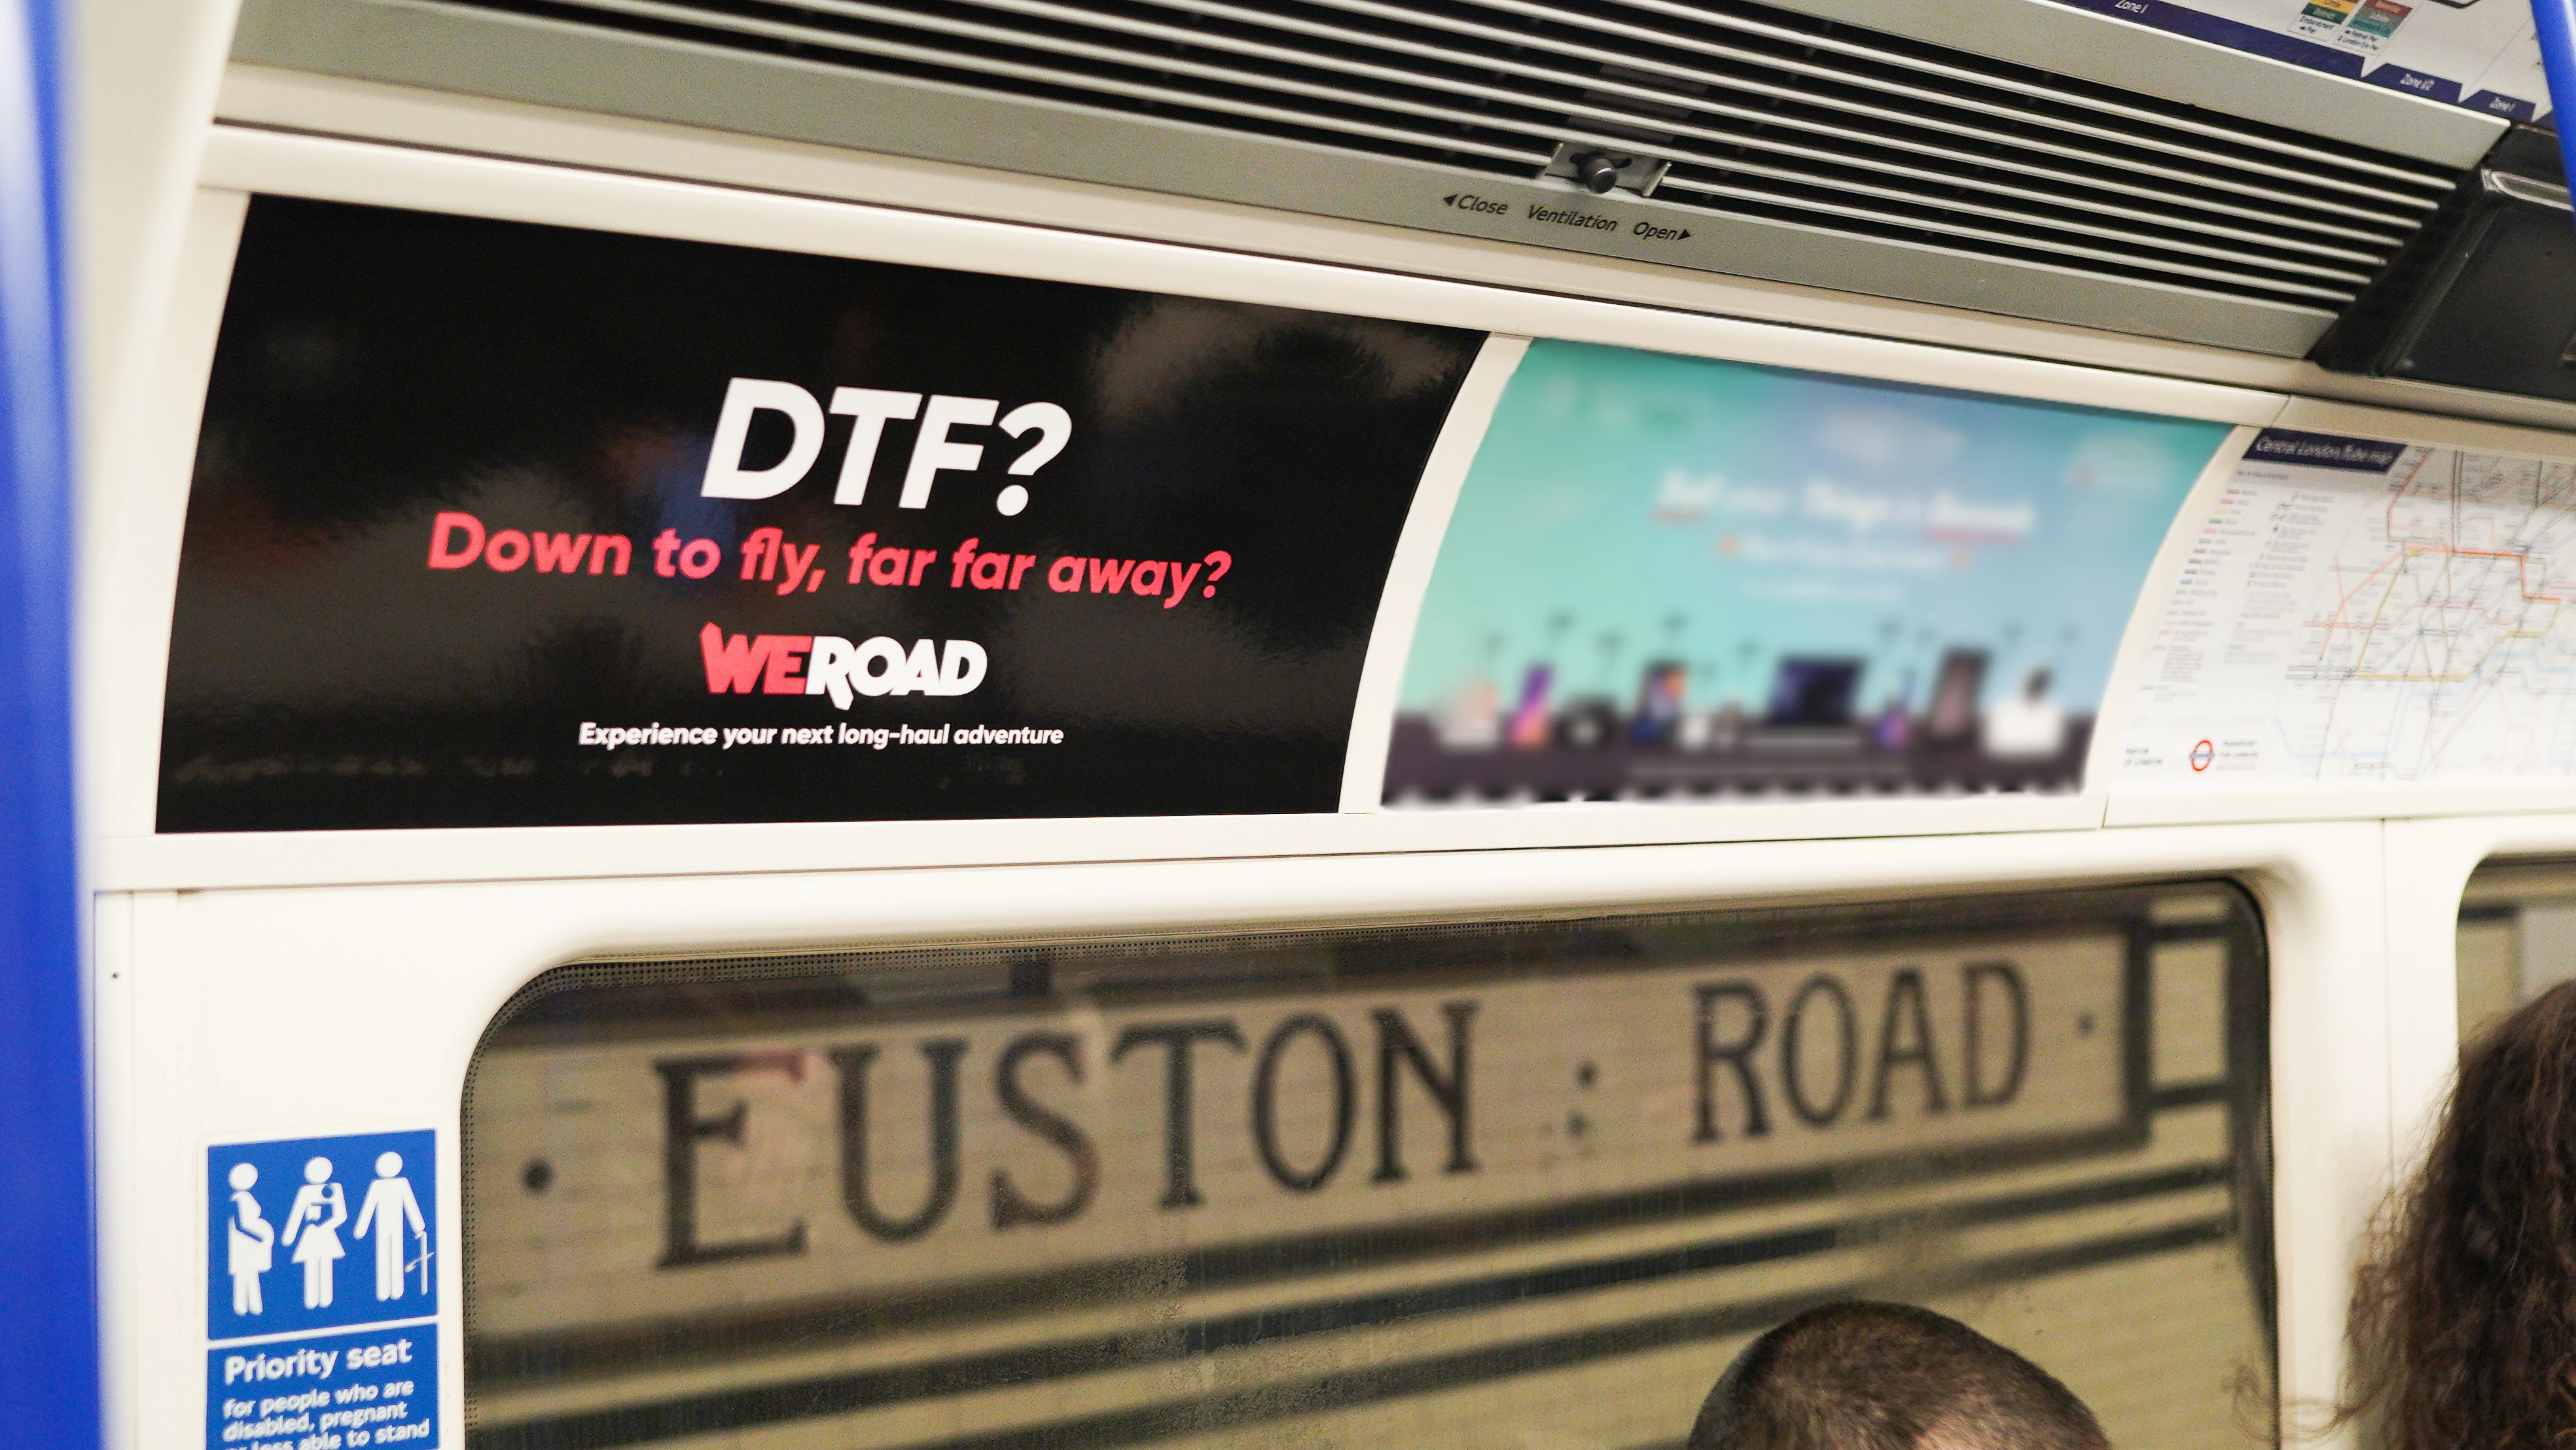 A WeRoad ad inside a tube carriage stating 'DTF? Down to fly far far away